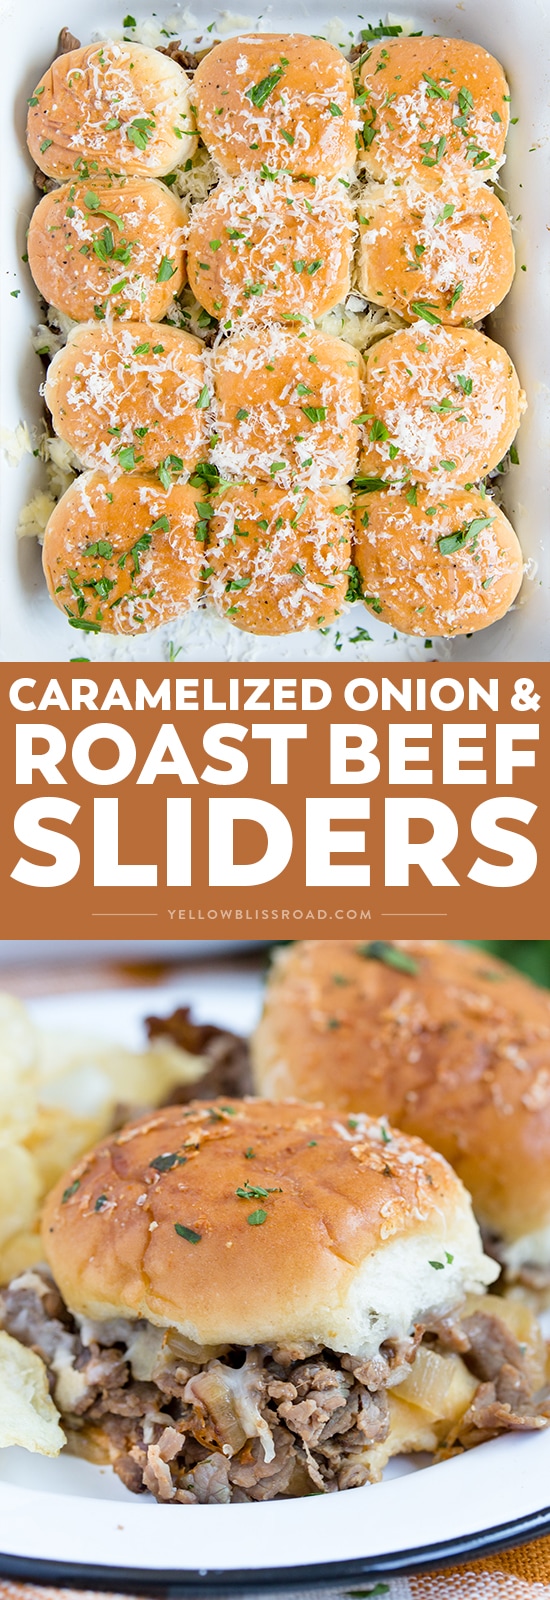 Social media image of Caramelized Onion and Asiago Roast Beef Sliders